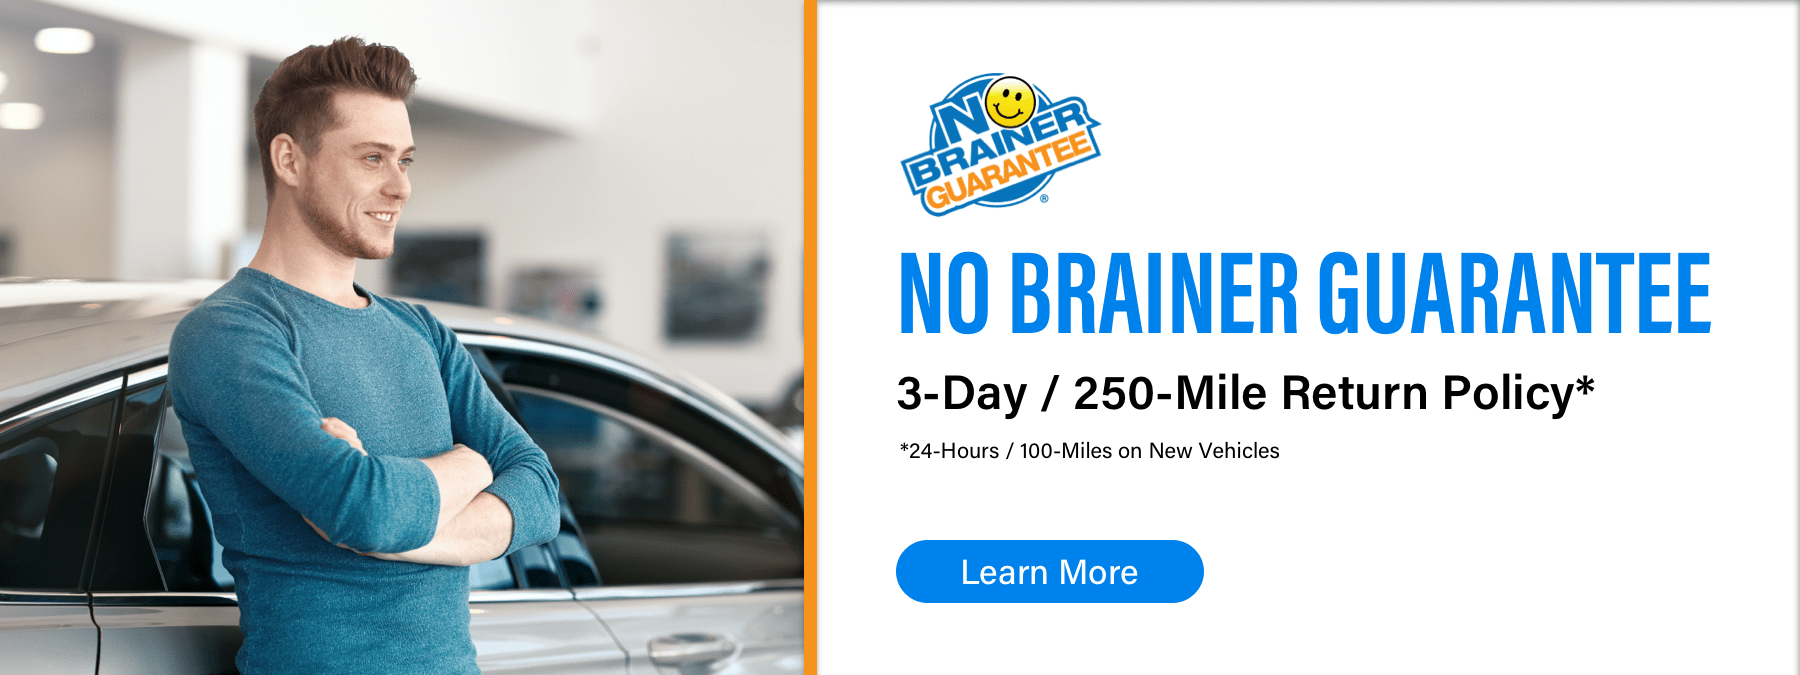 No Brainer Guarantee, 3-Day/250-Mile Return Policy*, *24-hours/100-Miles on New Vehicles, Learn More